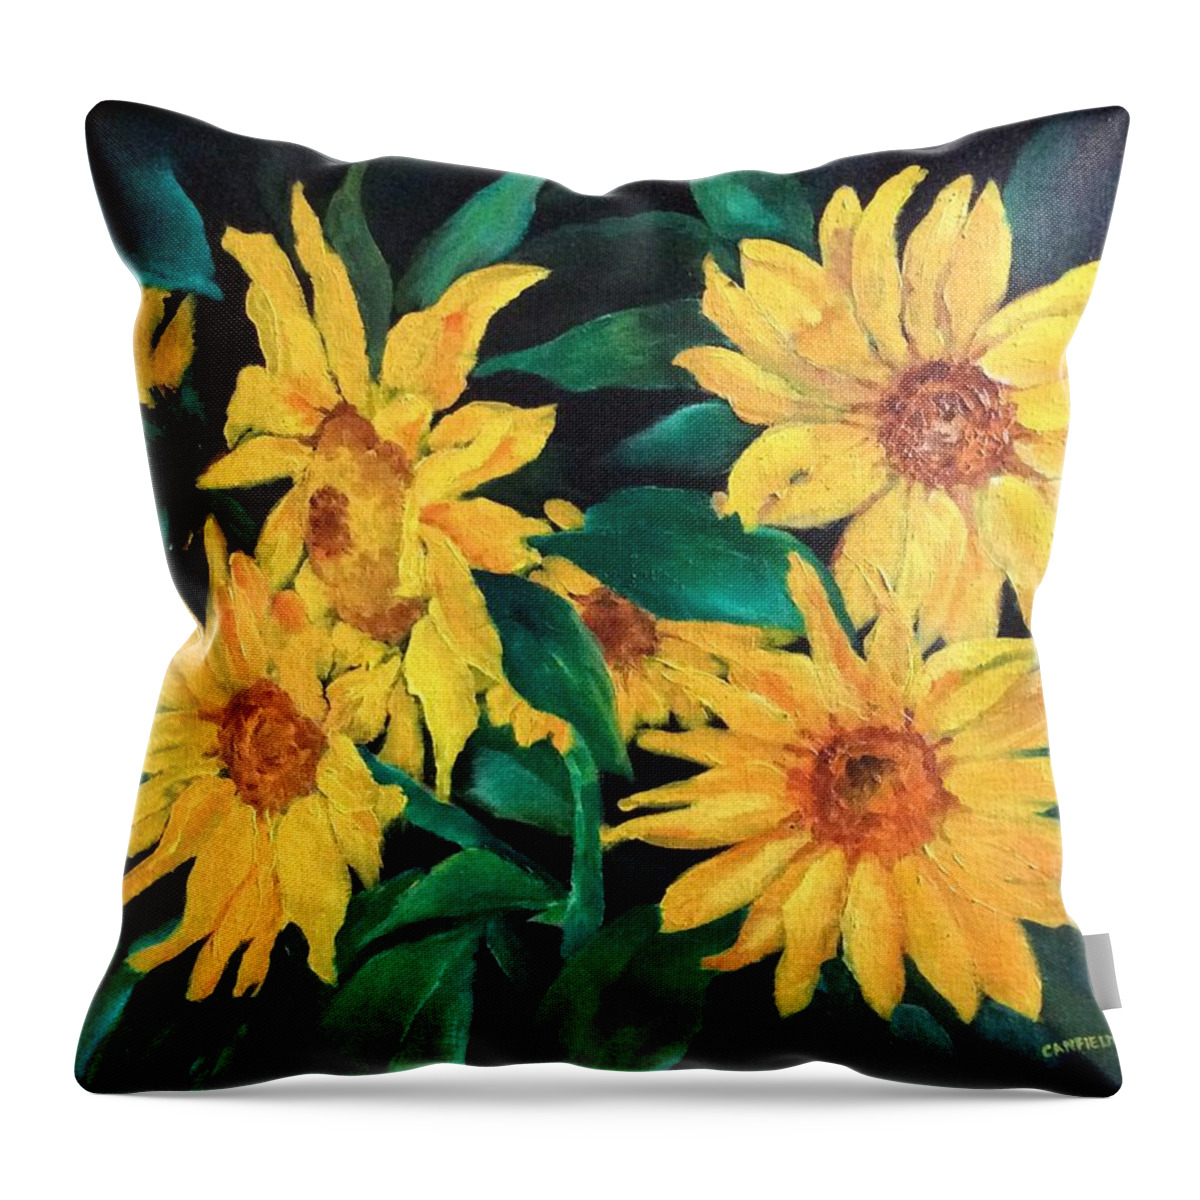 Flowers Throw Pillow featuring the painting Sunflowers by Ellen Canfield